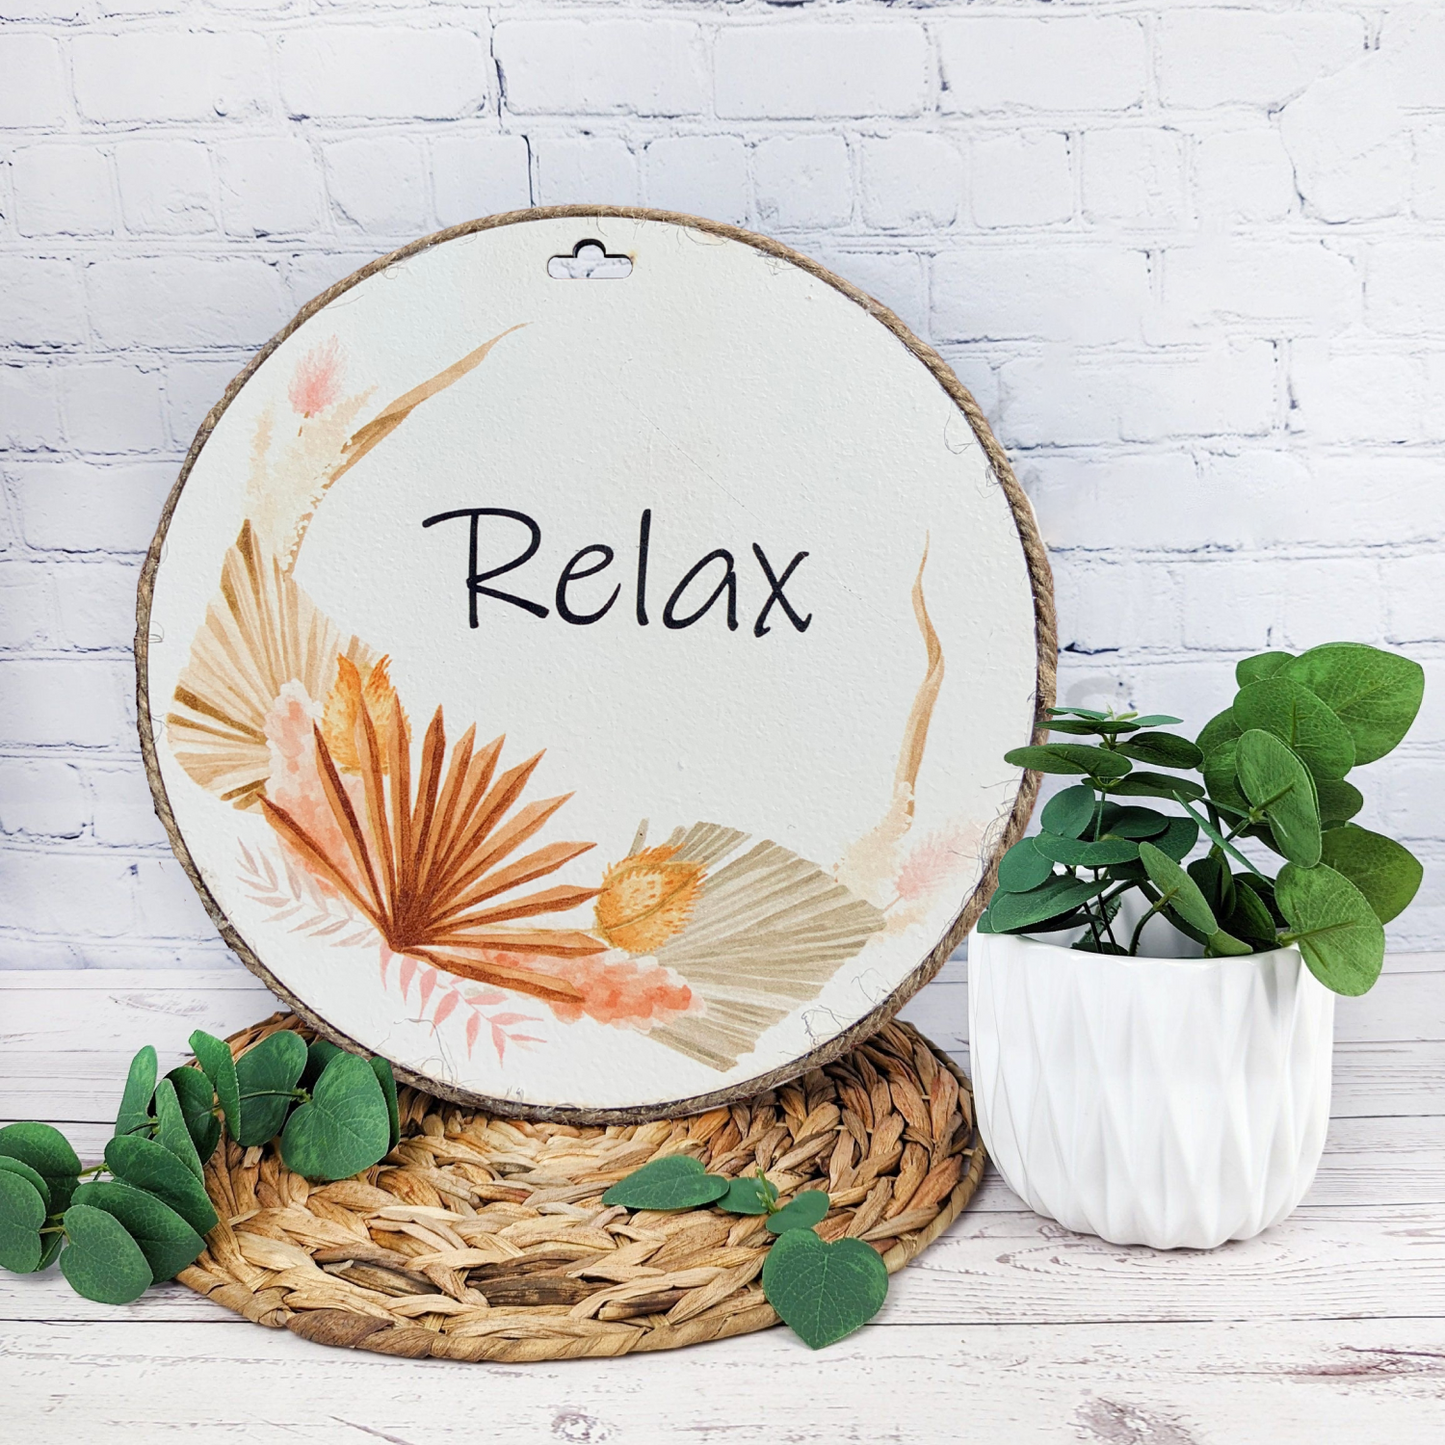 Relax Wood Print Colorful Wall or Door Hanging